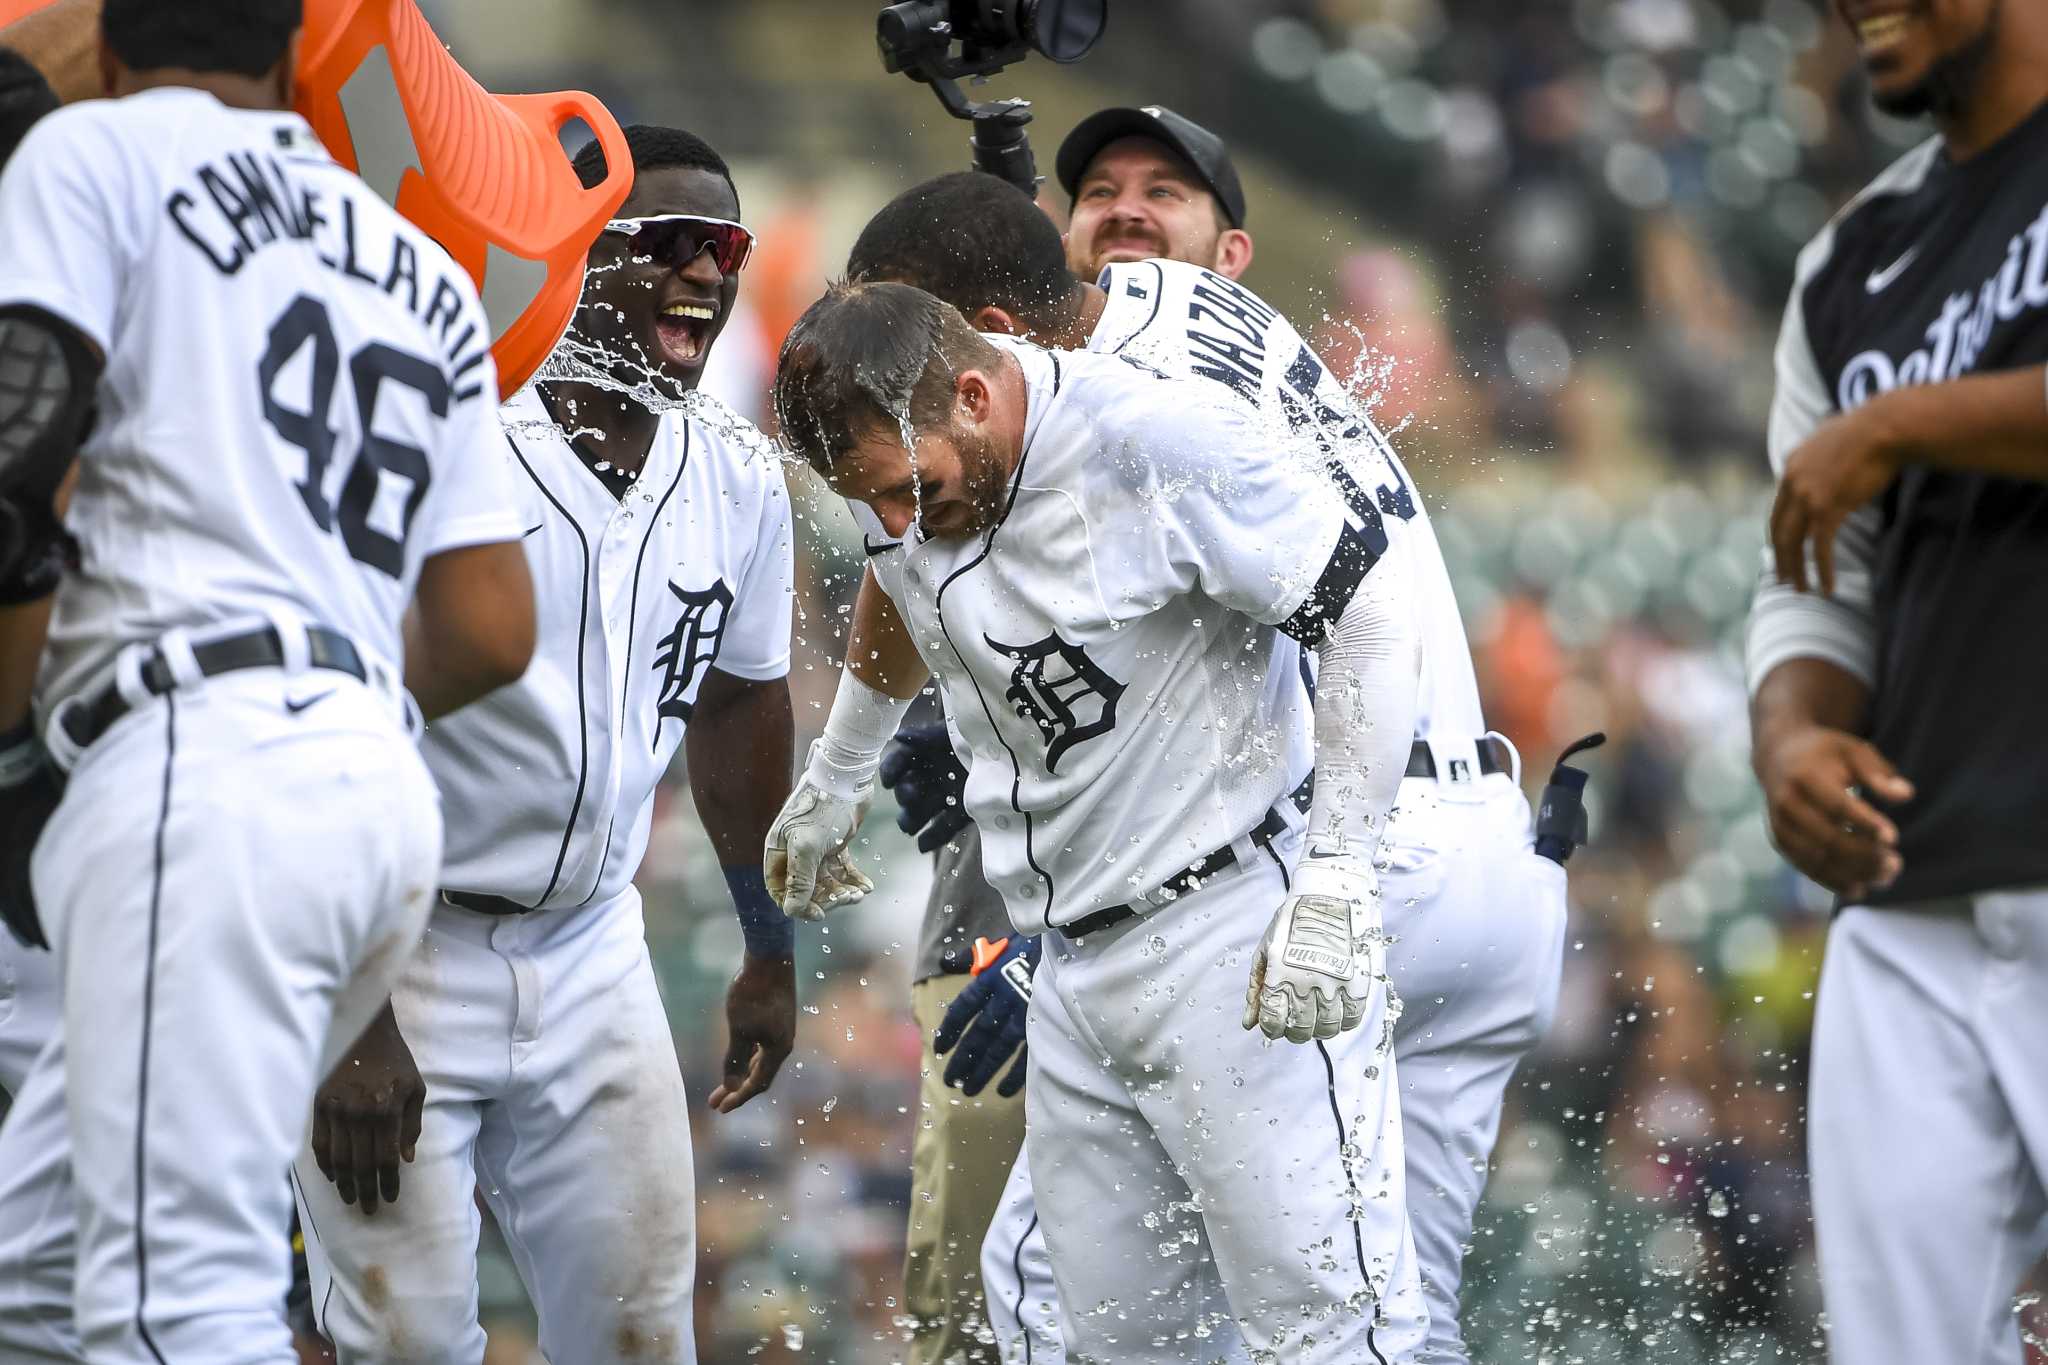 Detroit Tigers' AJ Hinch reflects on highs, lows of Astros tenure